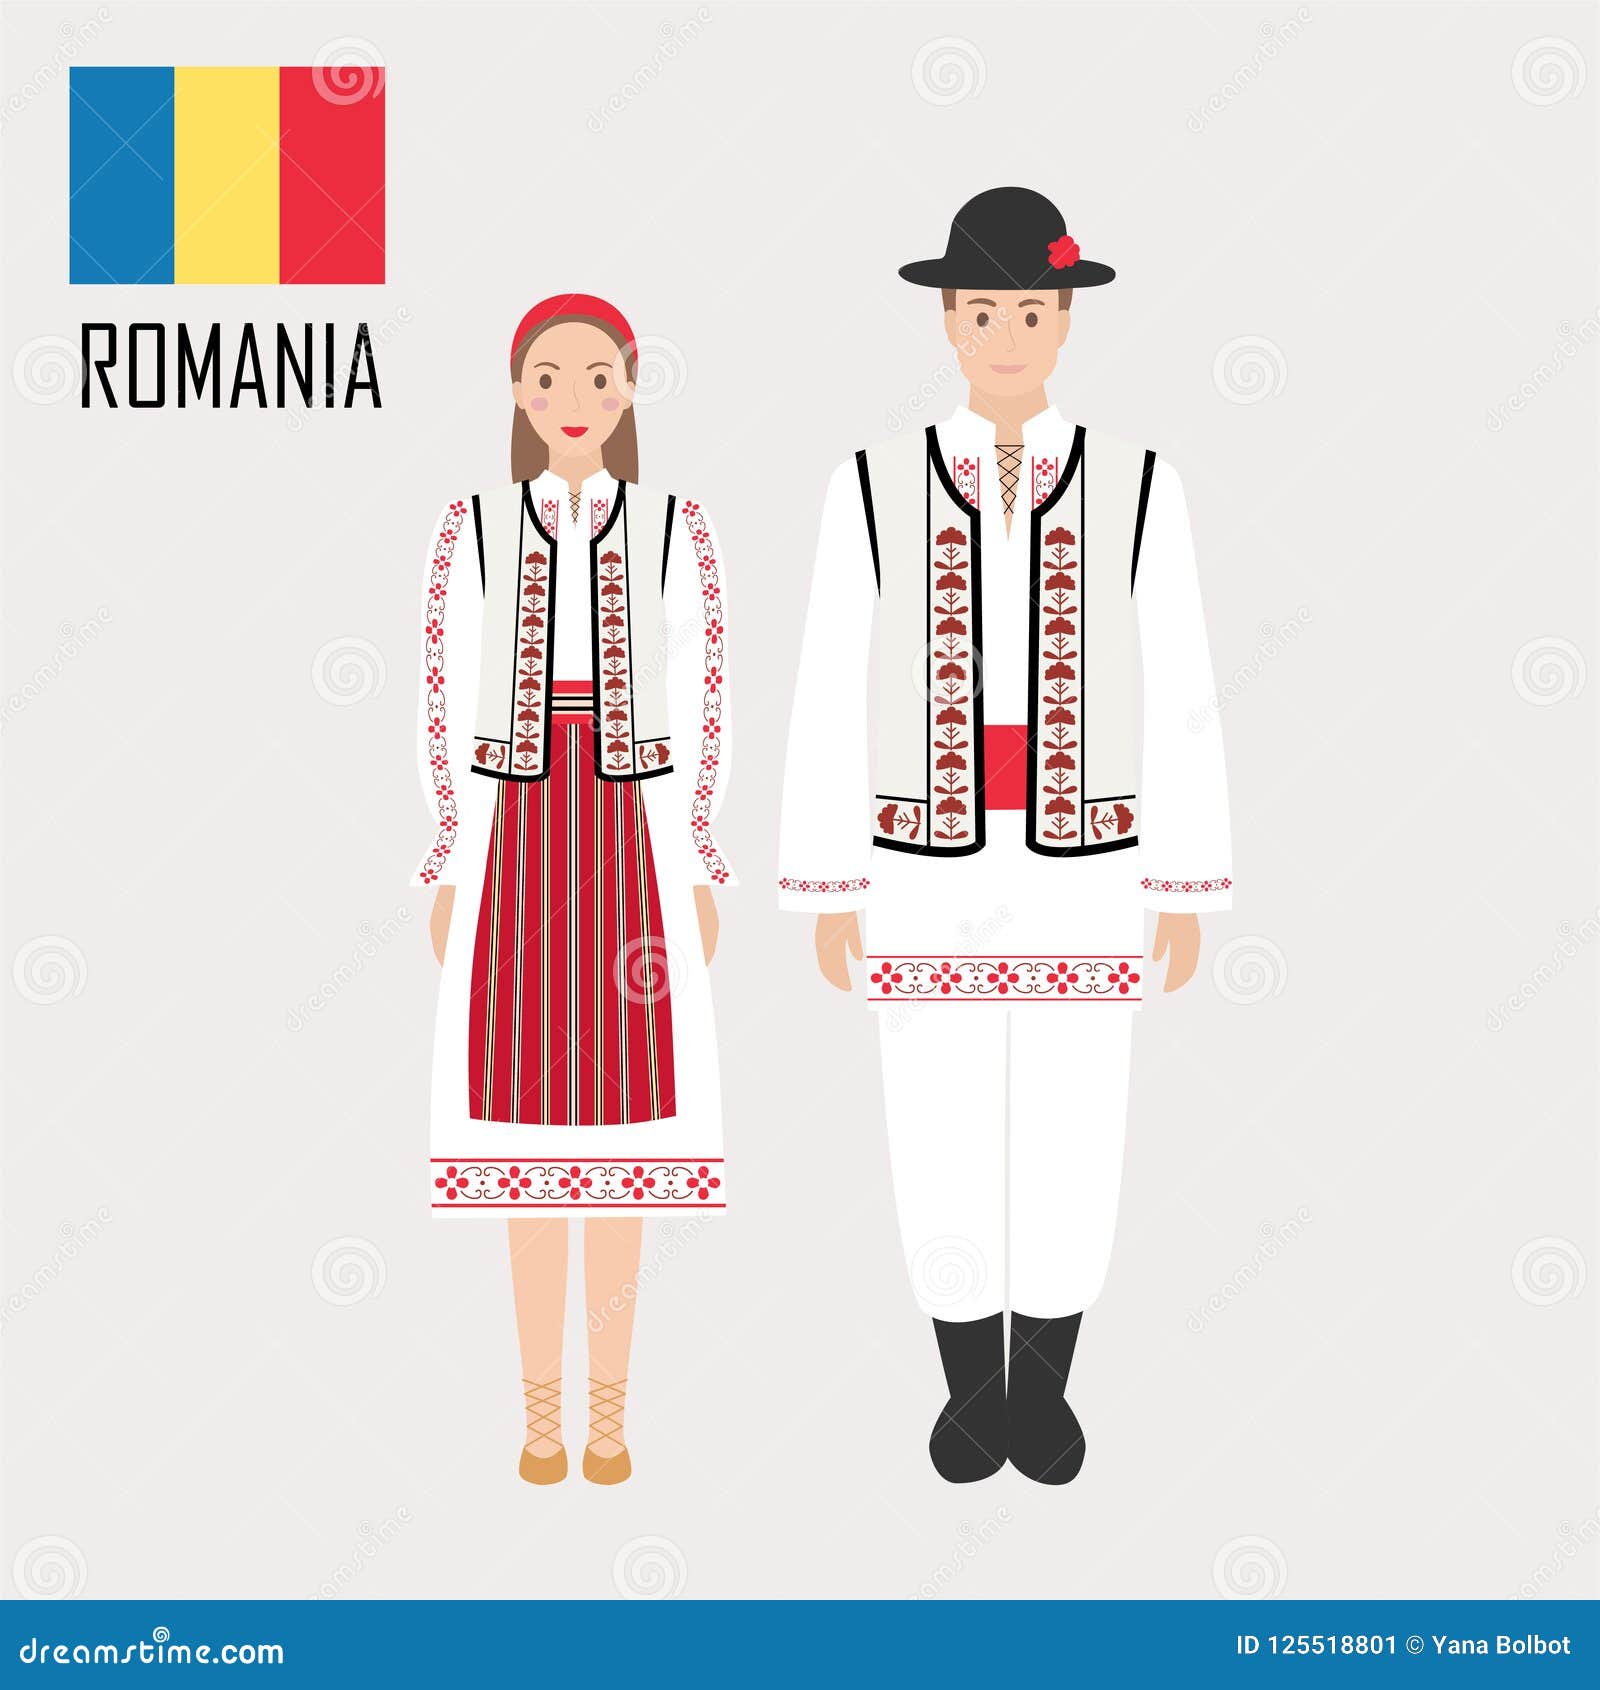 romanian man and woman in traditional costumes